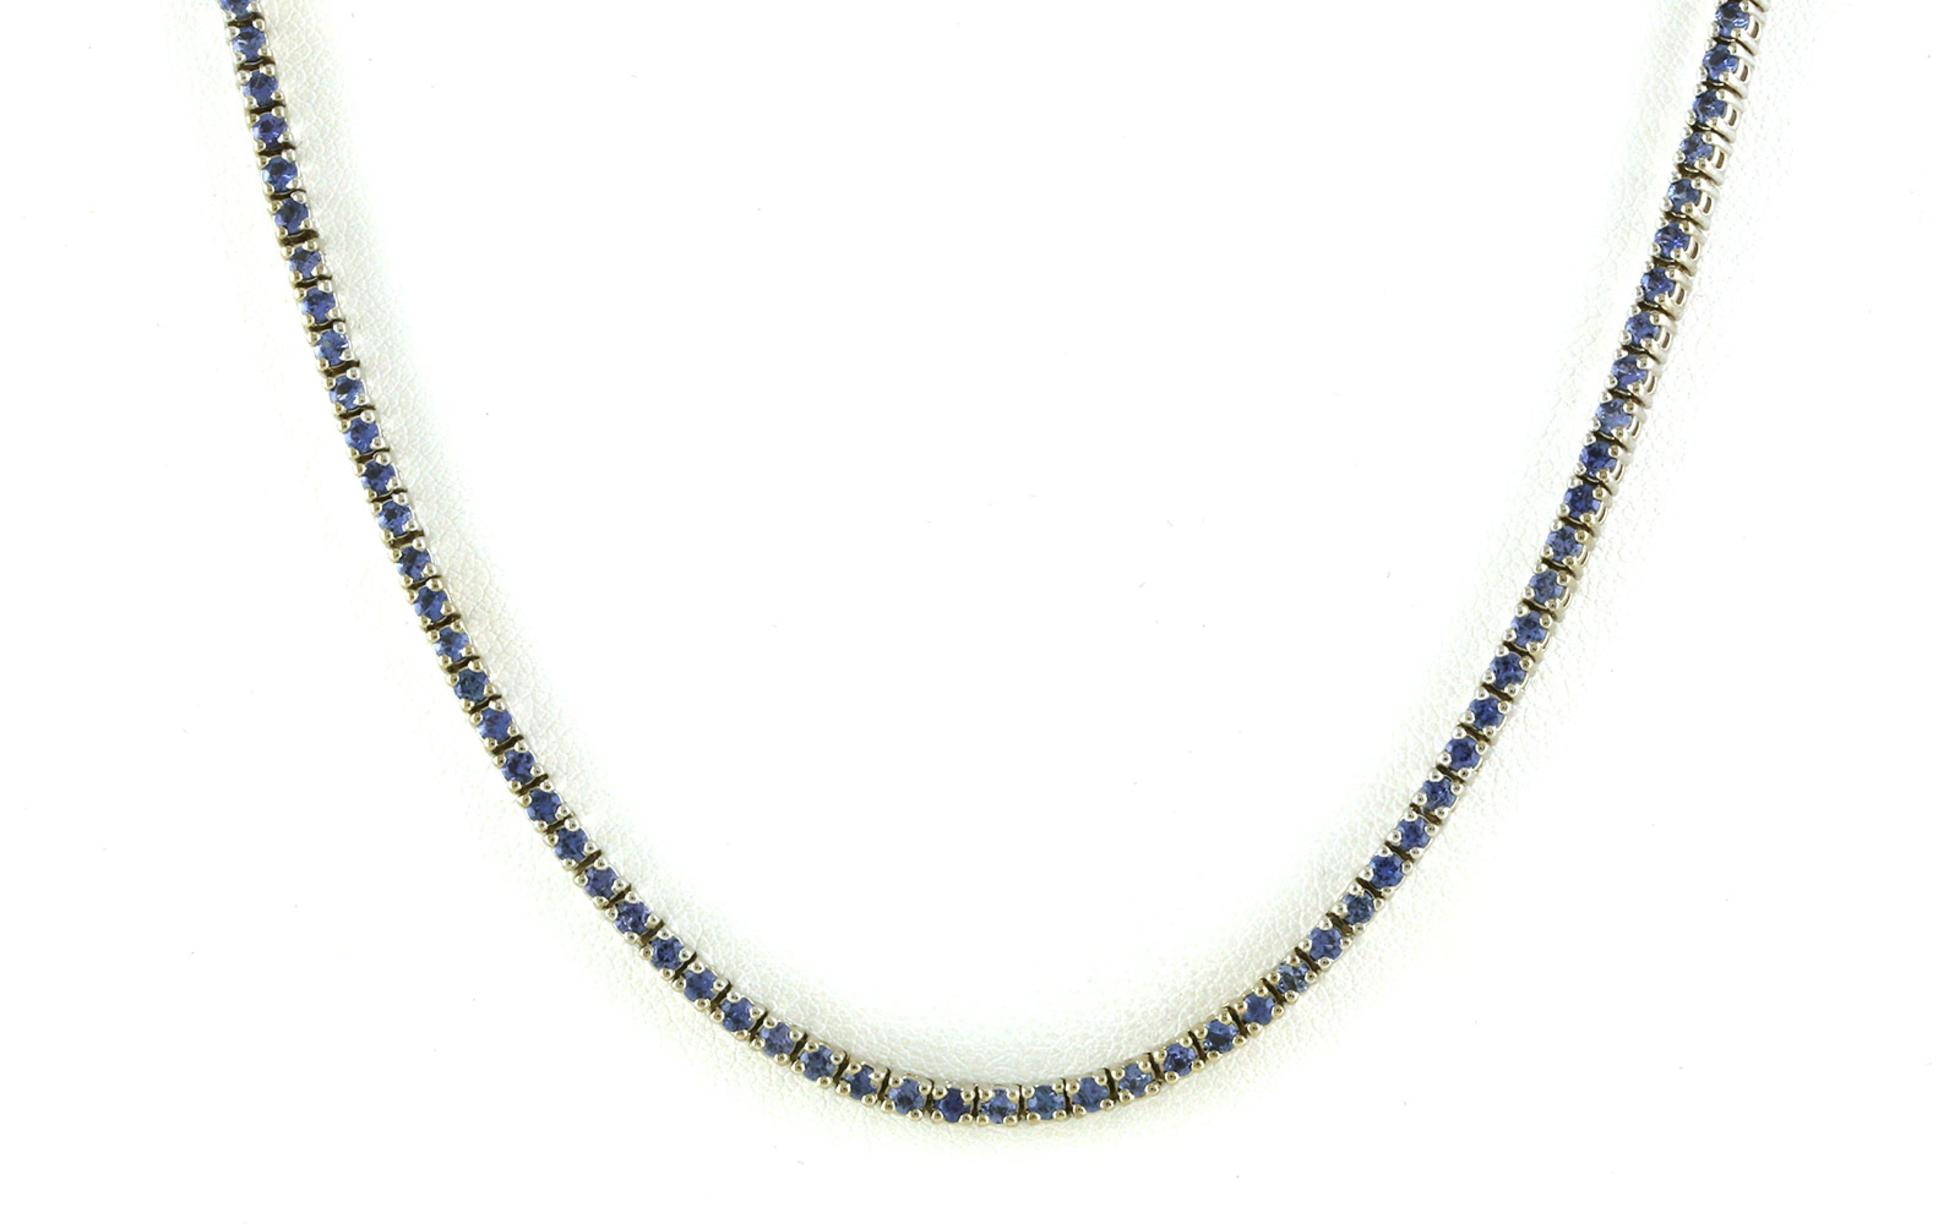 Riviera-style Montana Yogo Sapphire Necklace in White Gold (8.20cts TWT)